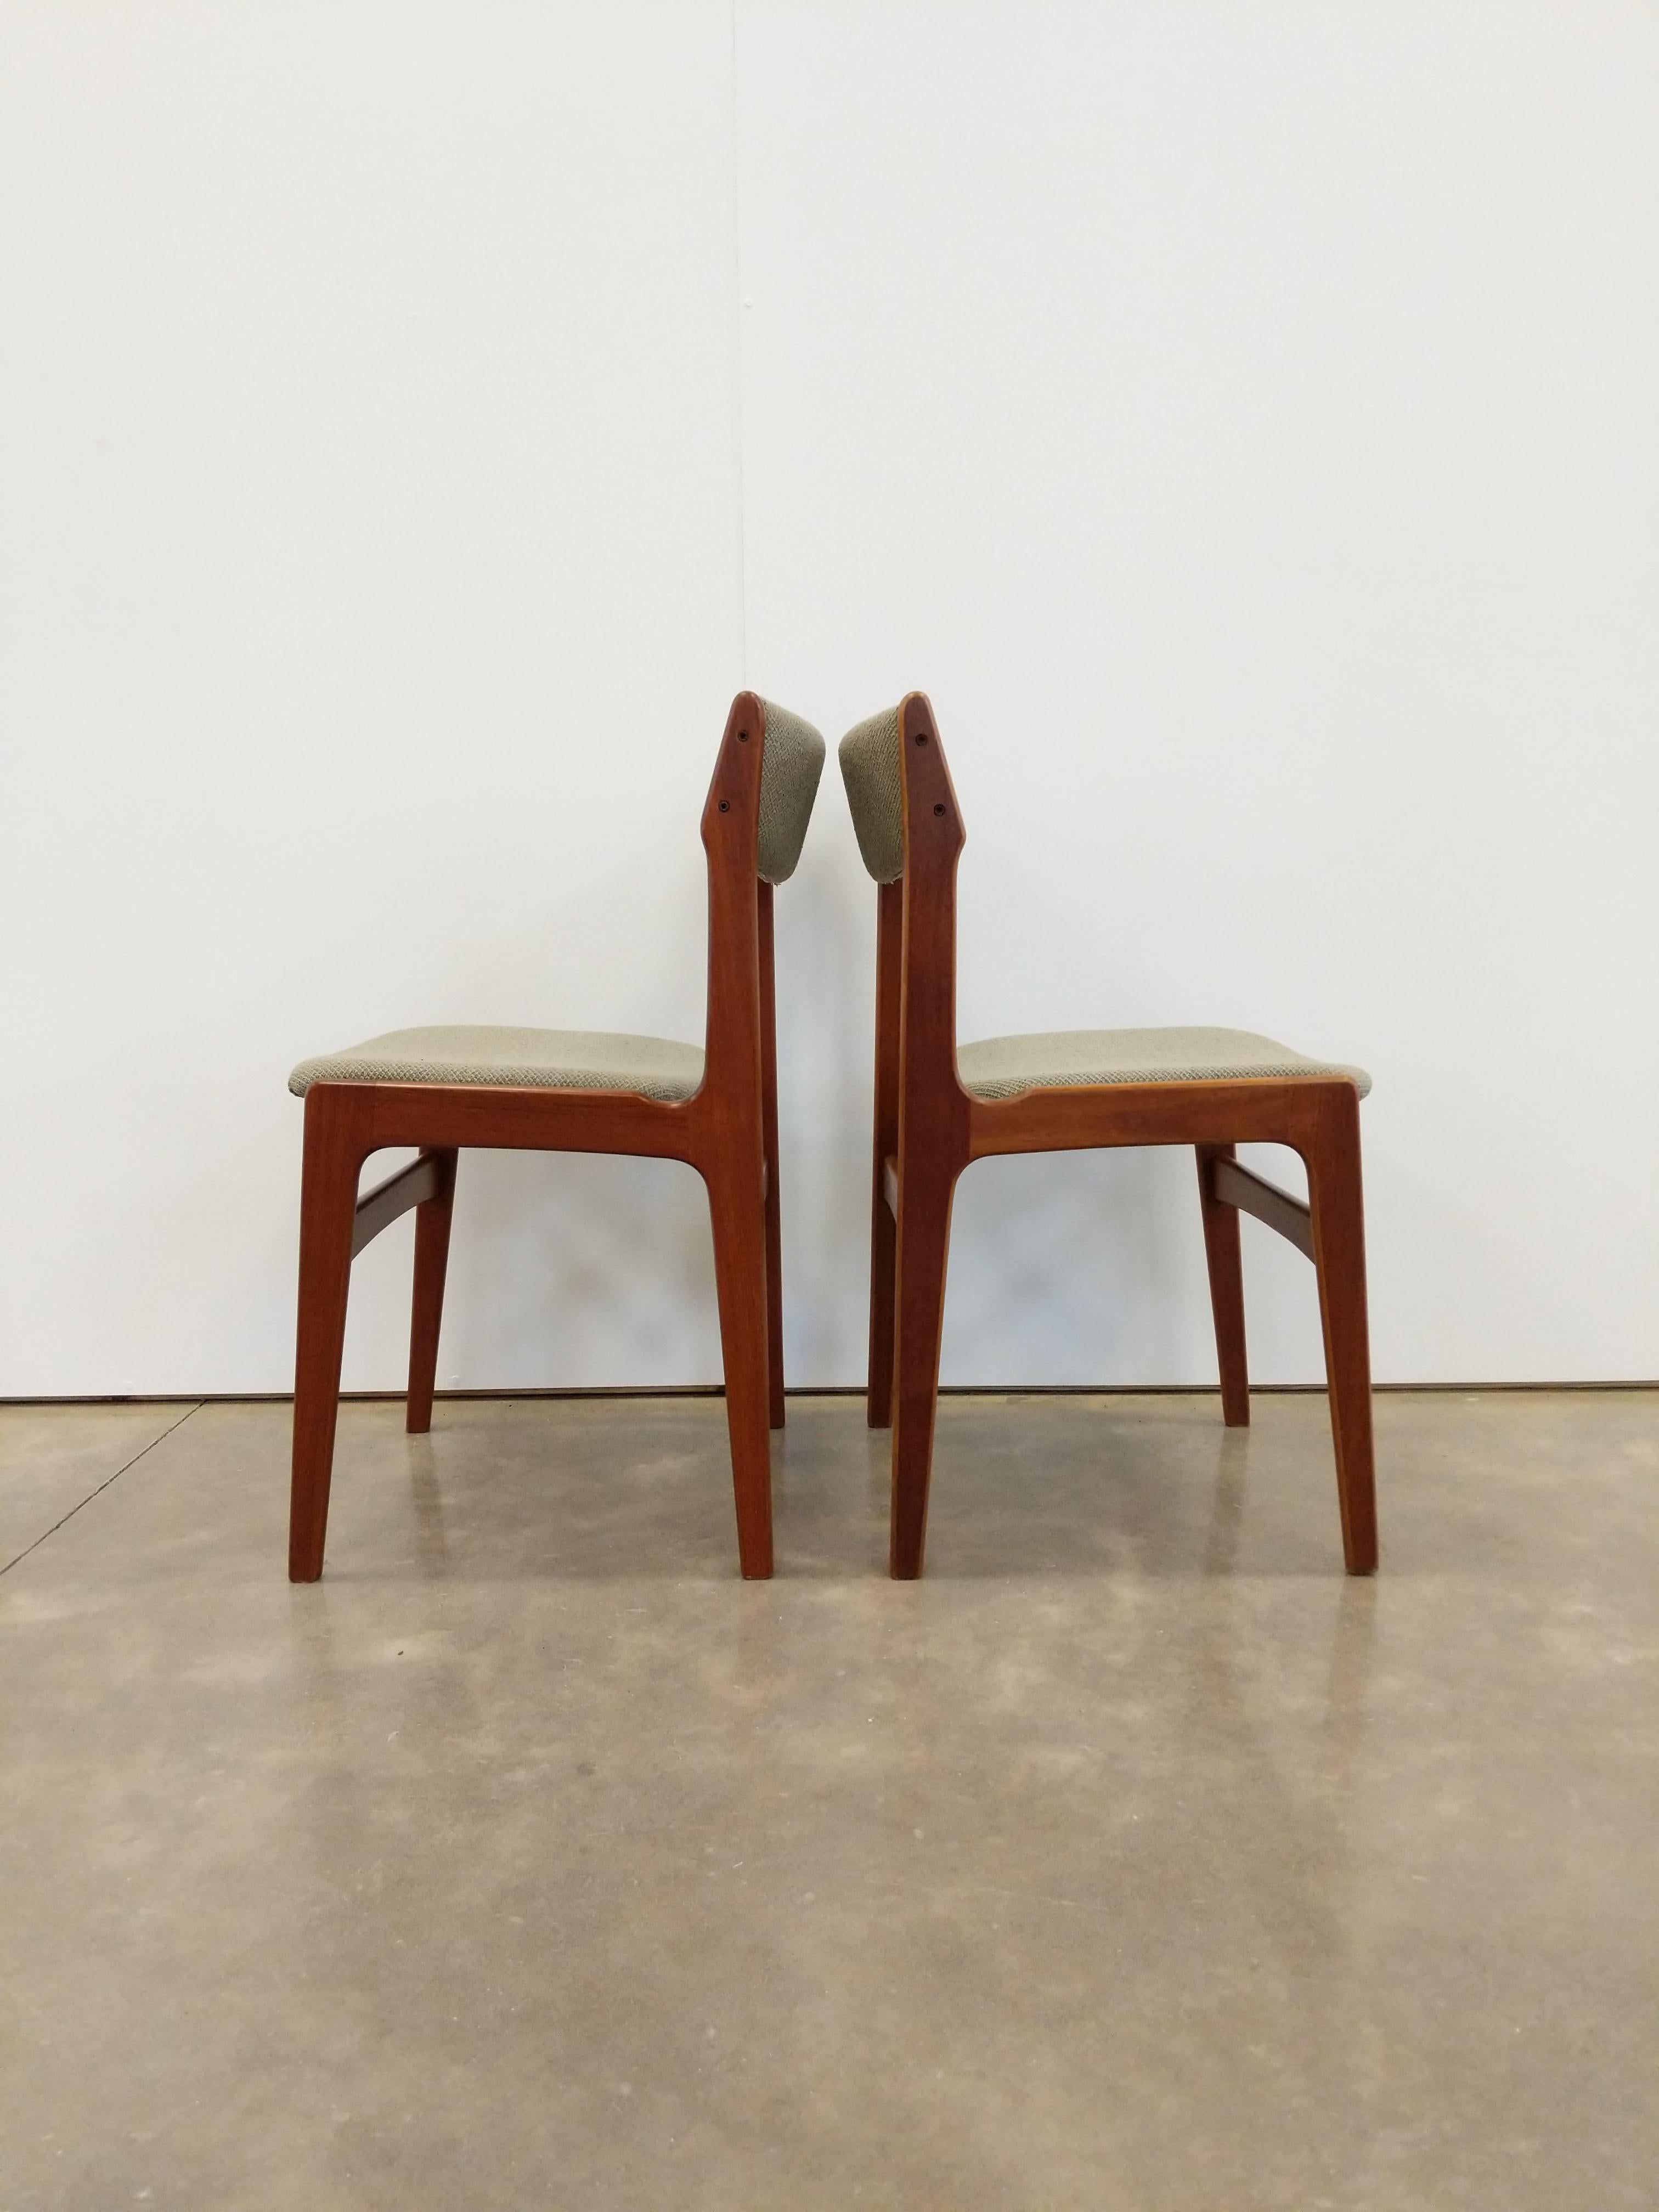 Pair of Vintage Danish Mid Century Modern Erik Buch Dining Chairs In Good Condition For Sale In Gardiner, NY